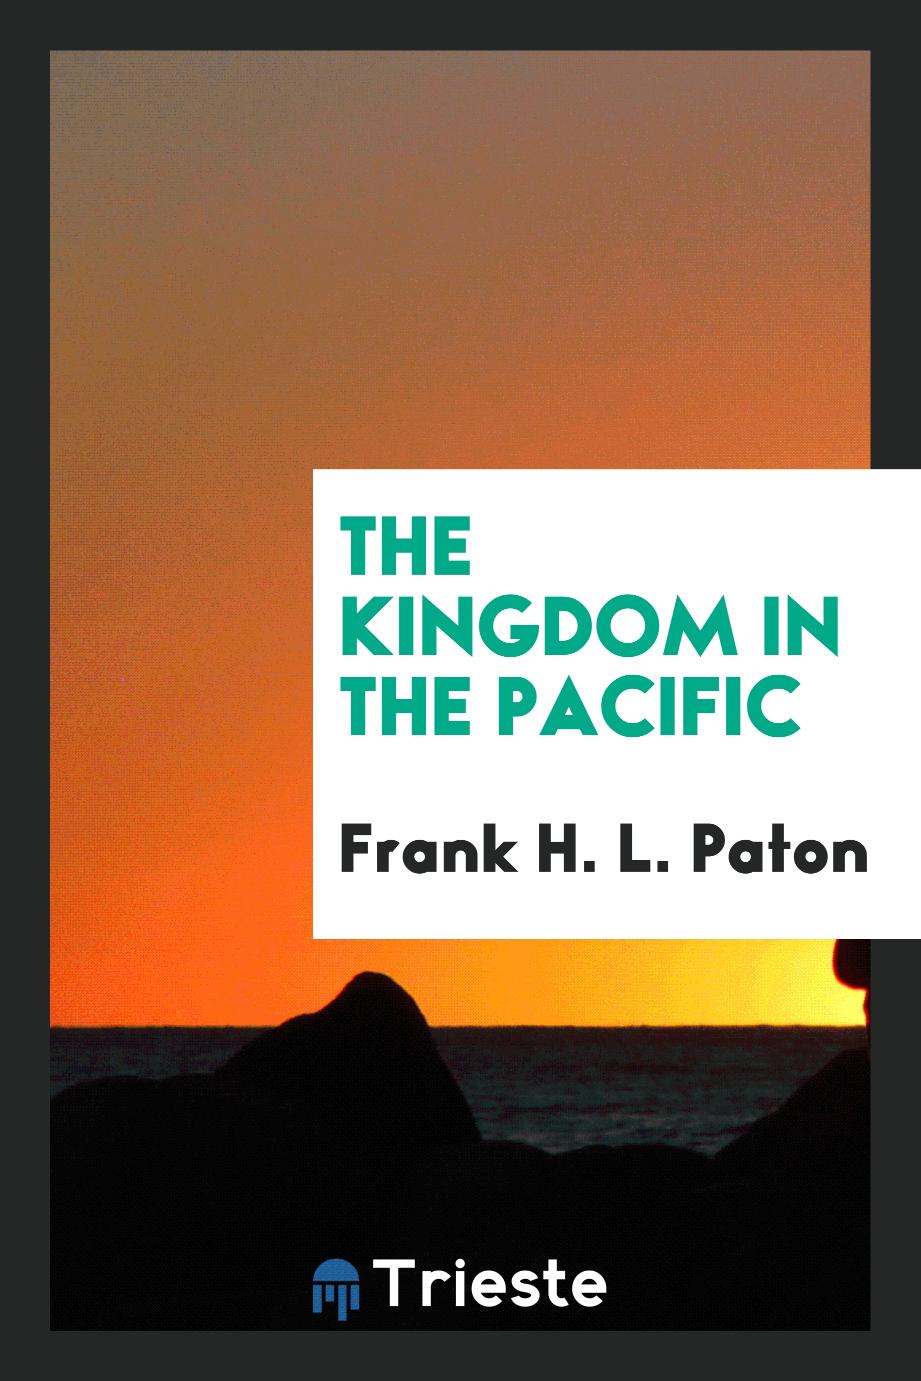 The kingdom in the Pacific